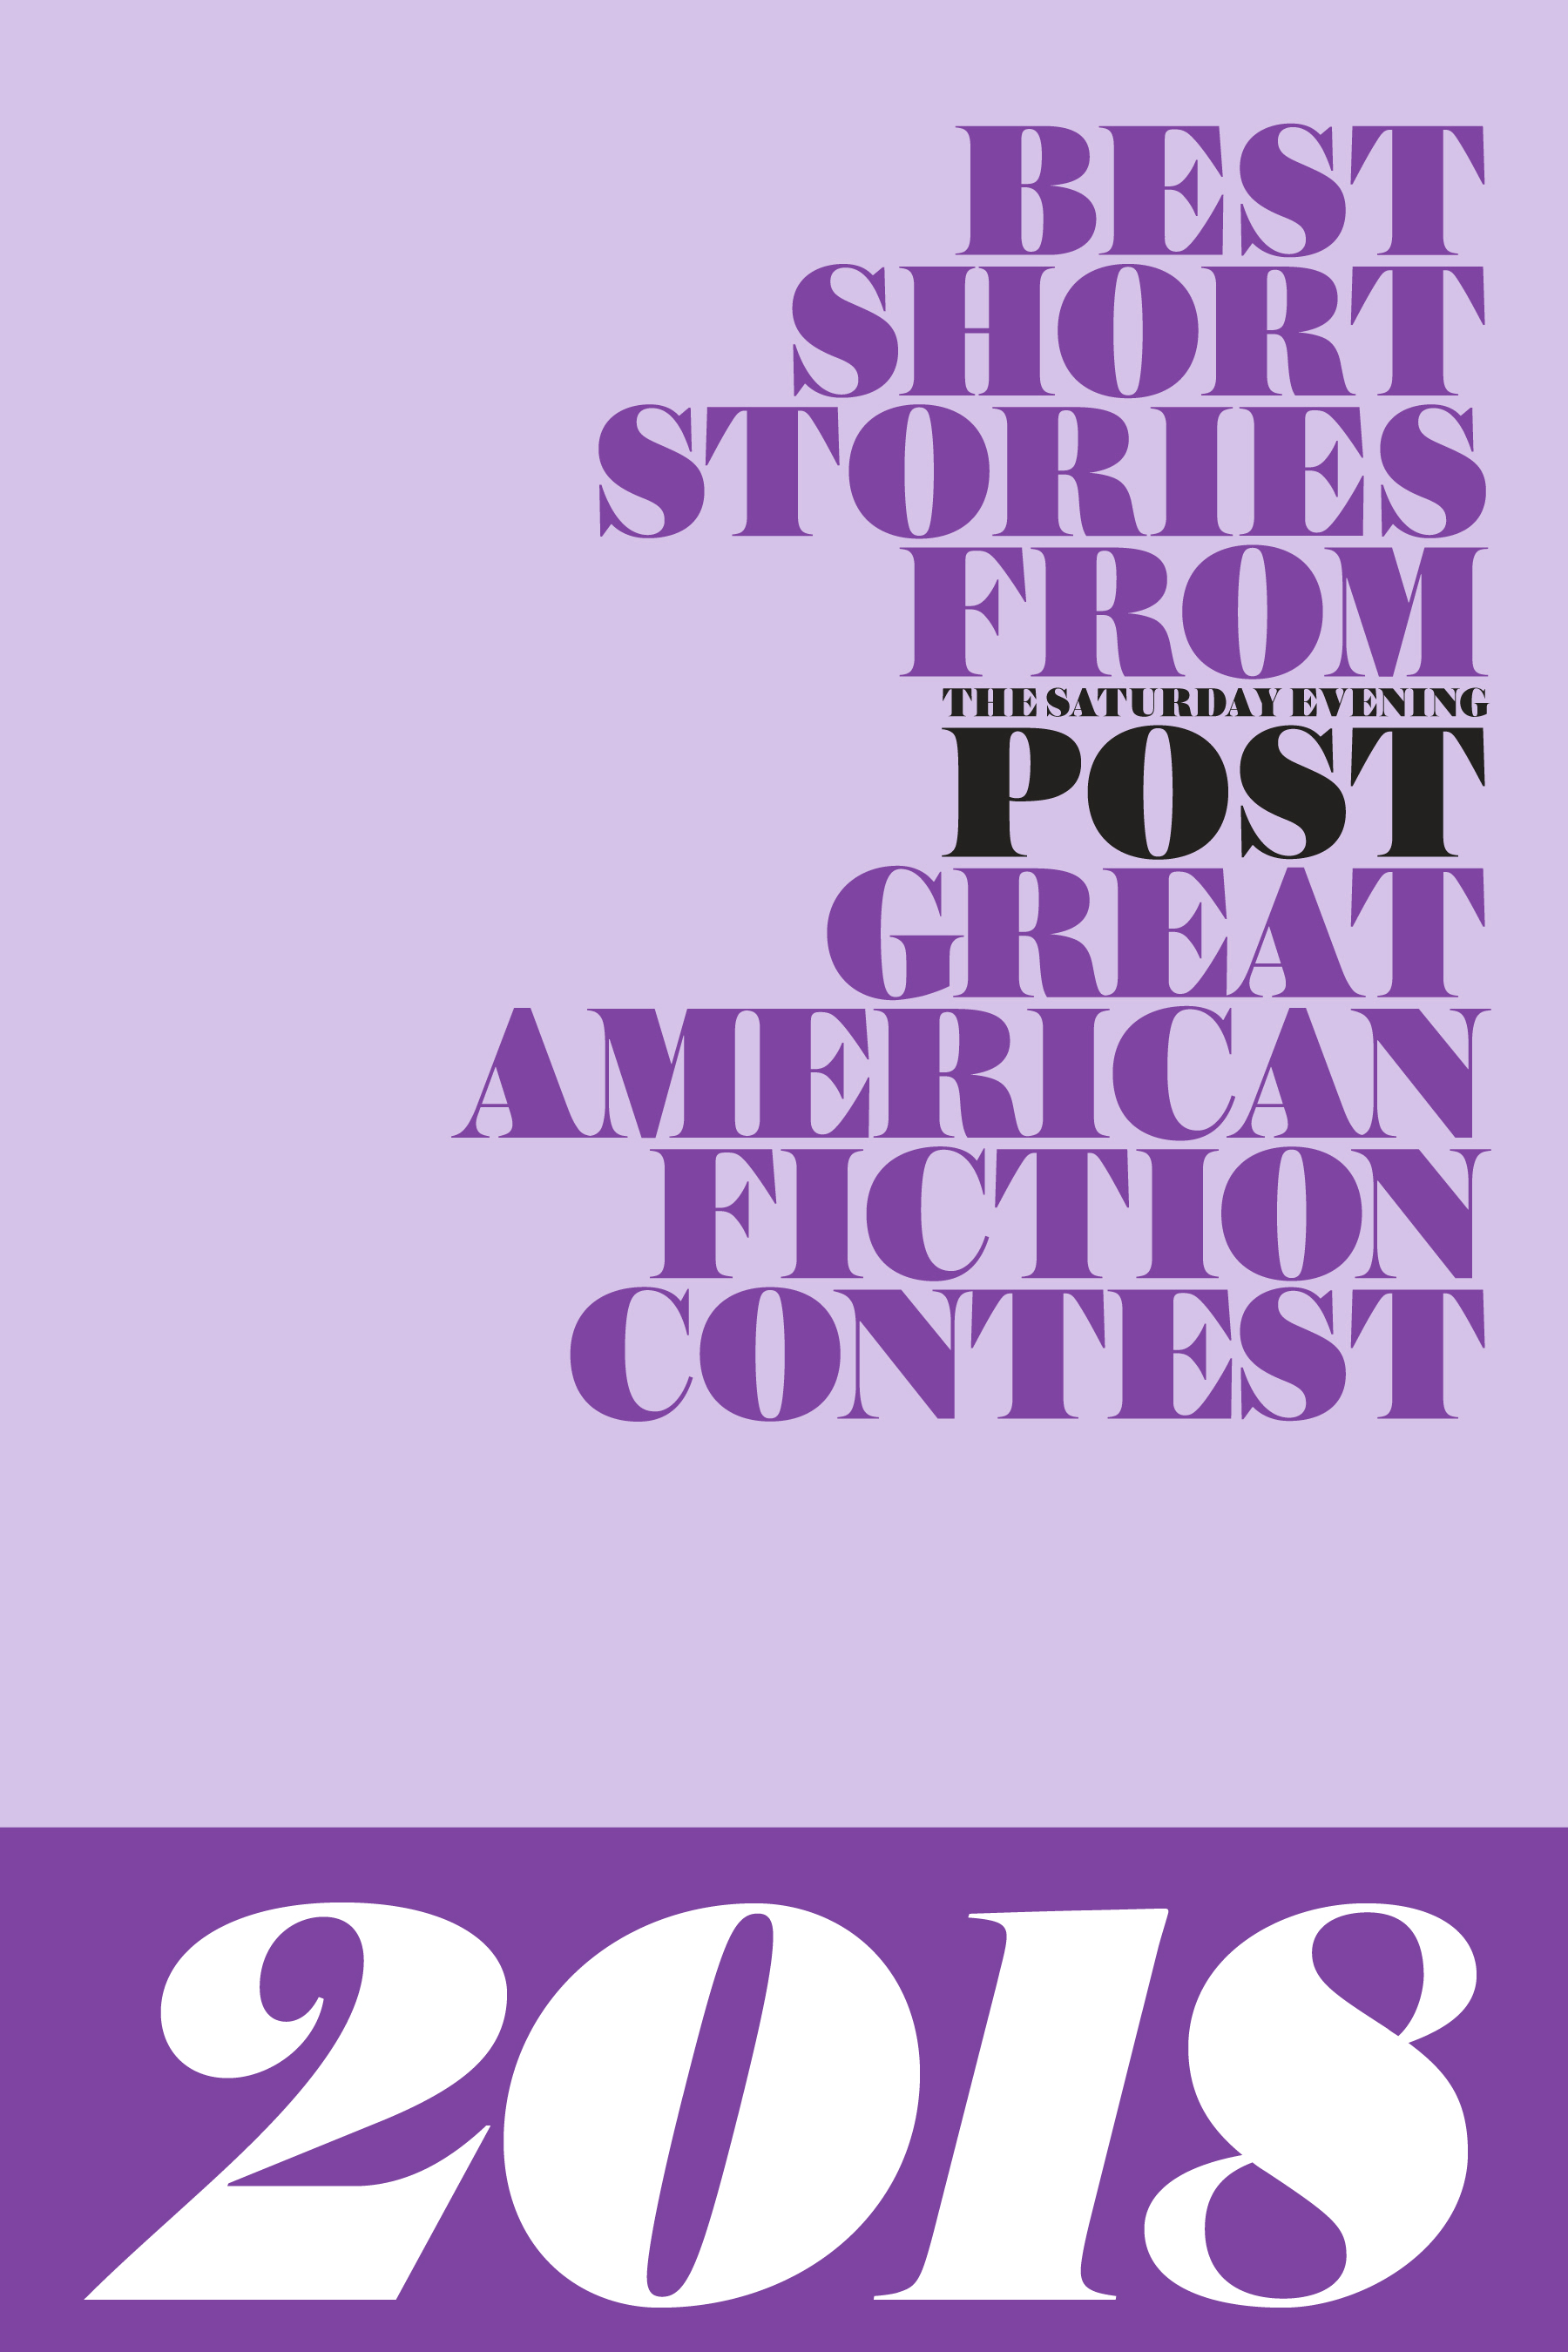 Best Short Stories from The Saturday Evening Post Great American Fiction Contest 2018